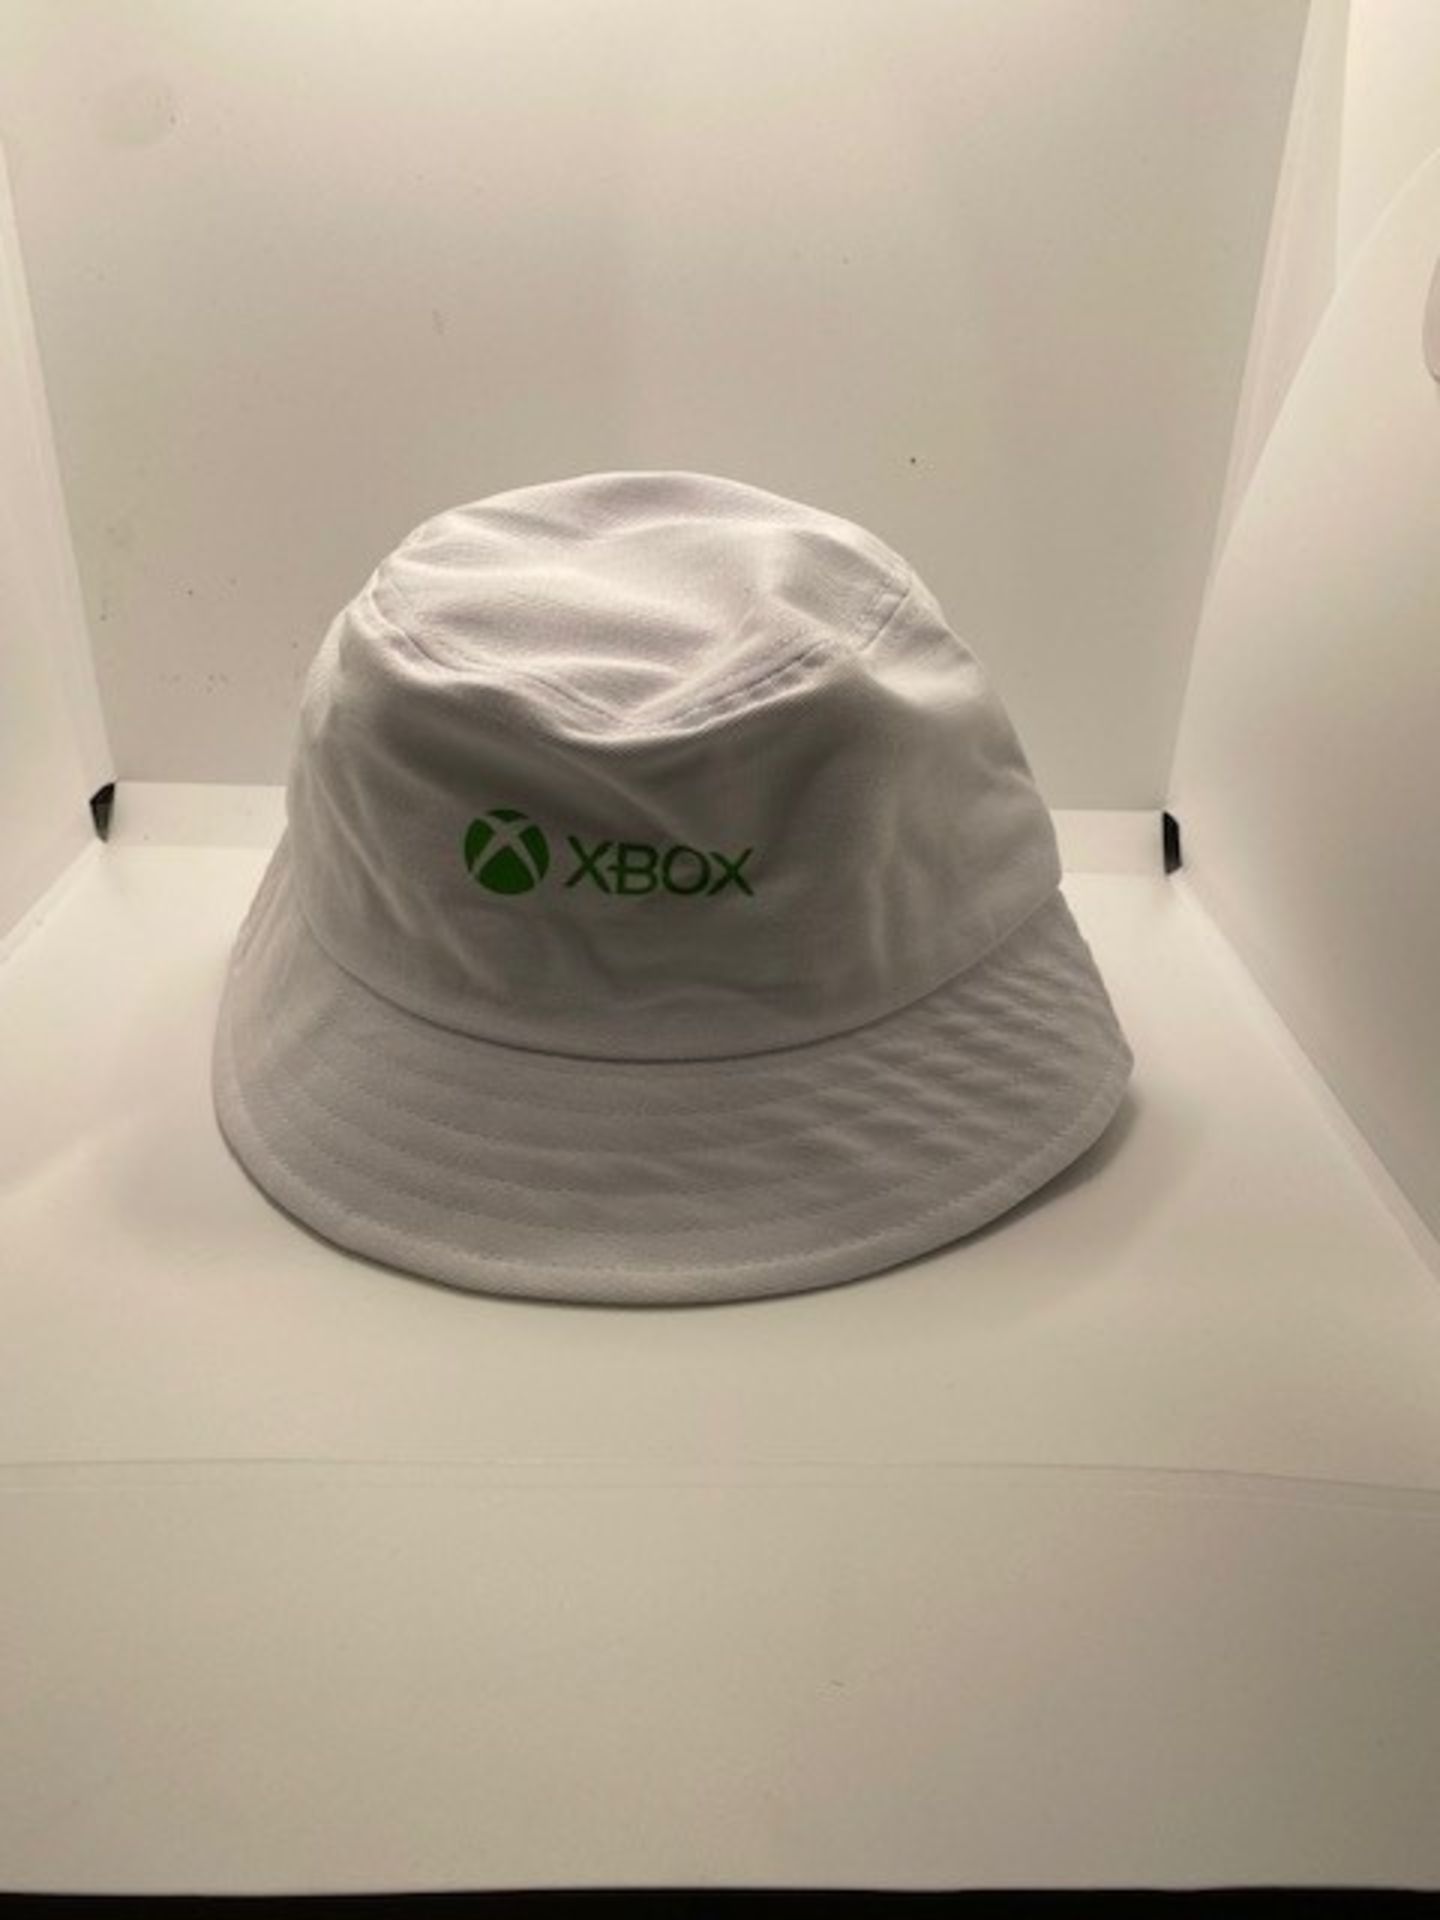 8500 X ENGLAND/XBOX FOOTBALL BRANDED/LICENSED BUCKET HATS - Image 2 of 3